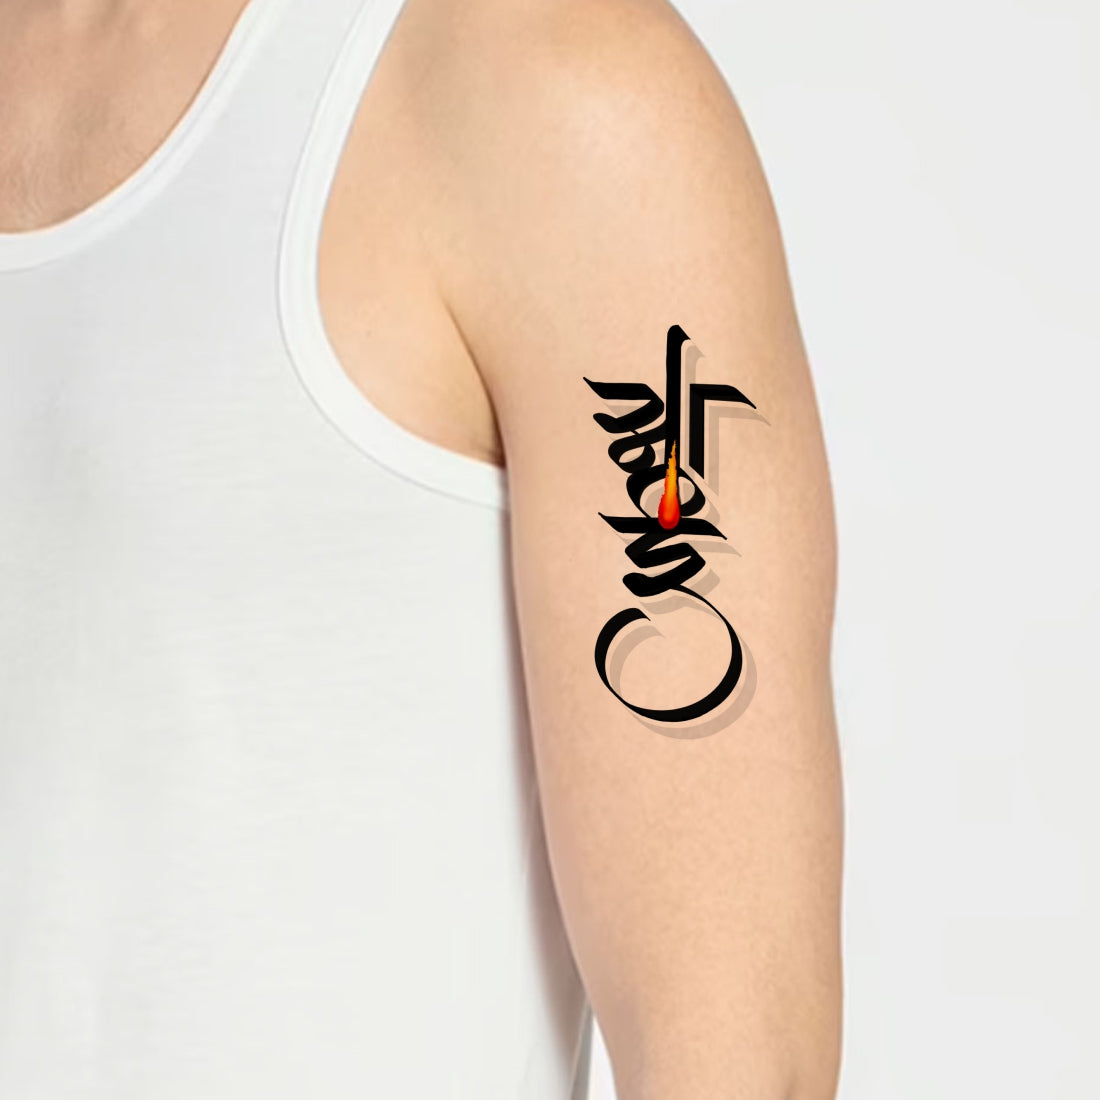 Check out 100 + mind-blowing name tattoo designs- BookMyTattoo